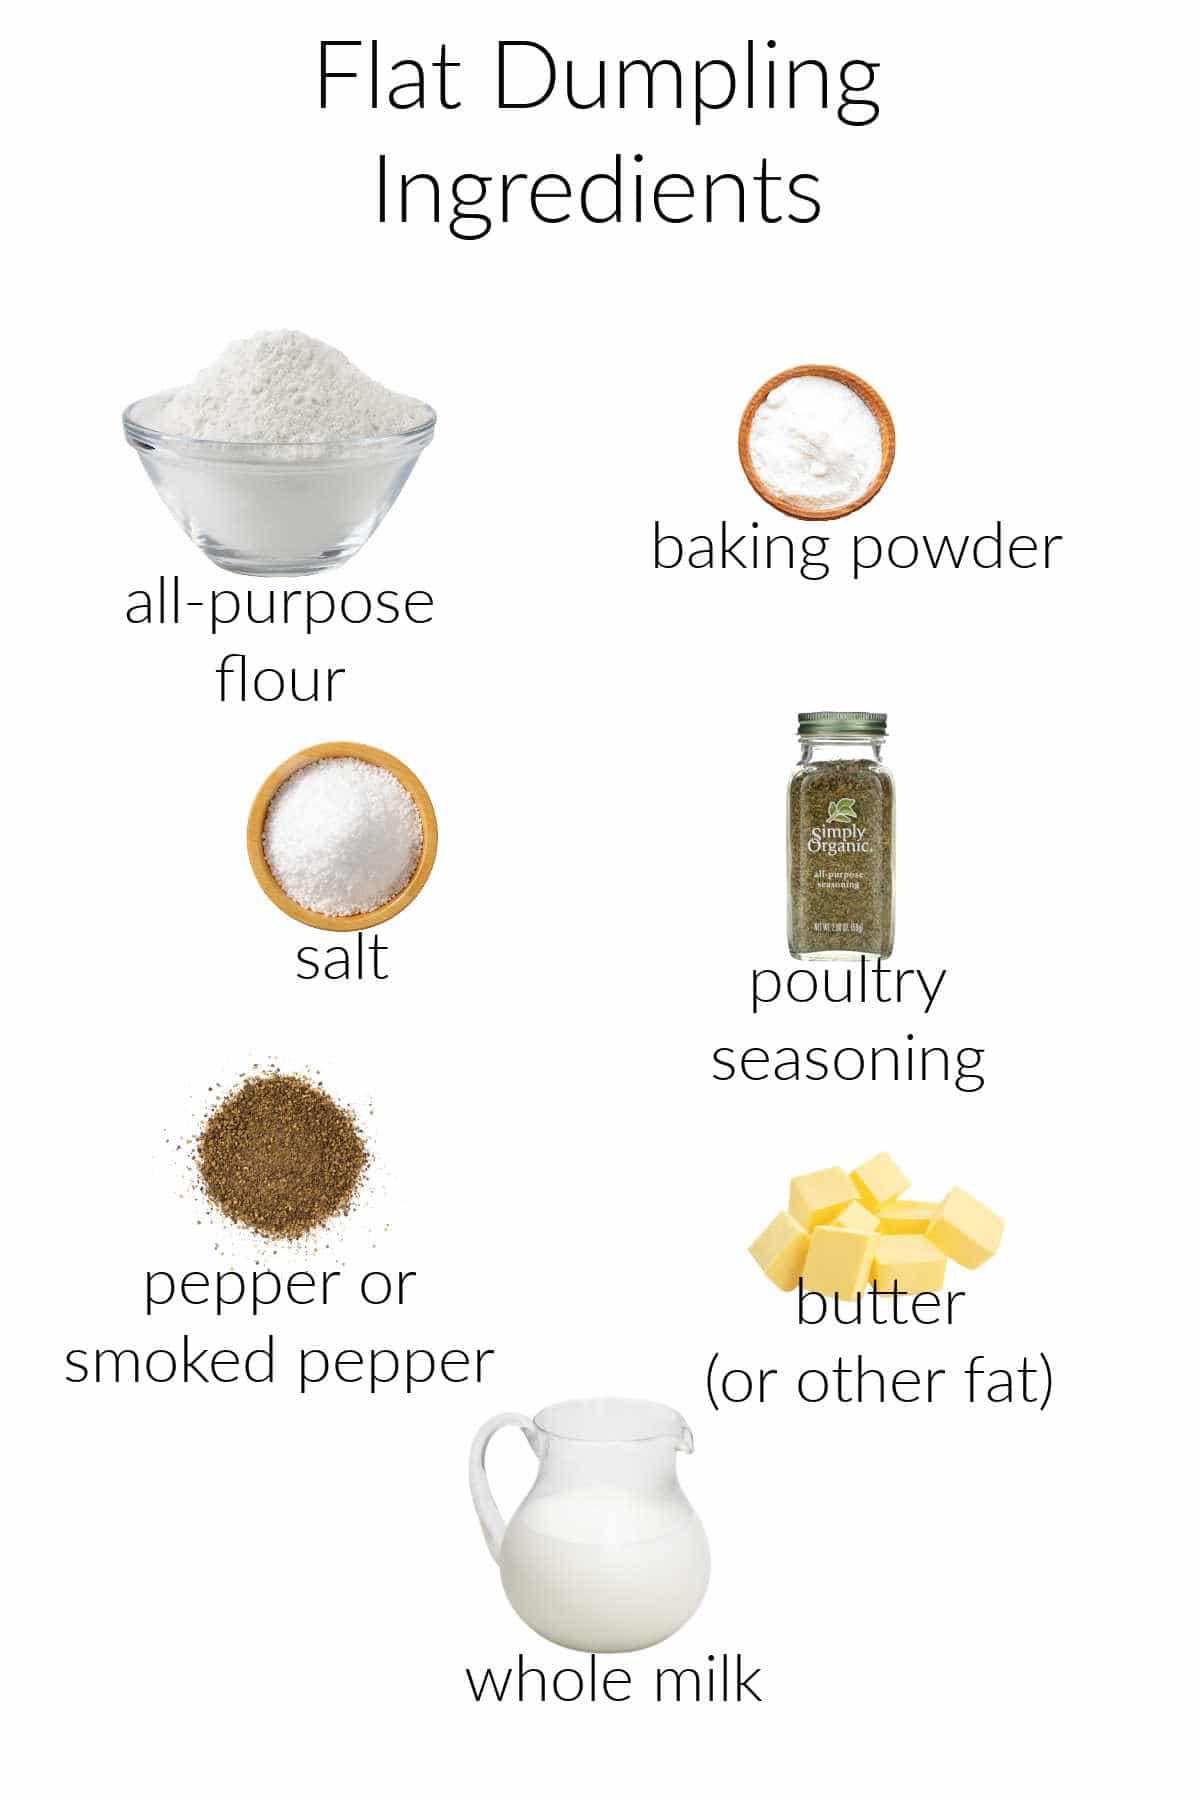 A collage of ingredients to make flat dumplings: all-purpose flour, baking powder, salt, poultry seasoning, black pepper, butter, and whole milk.